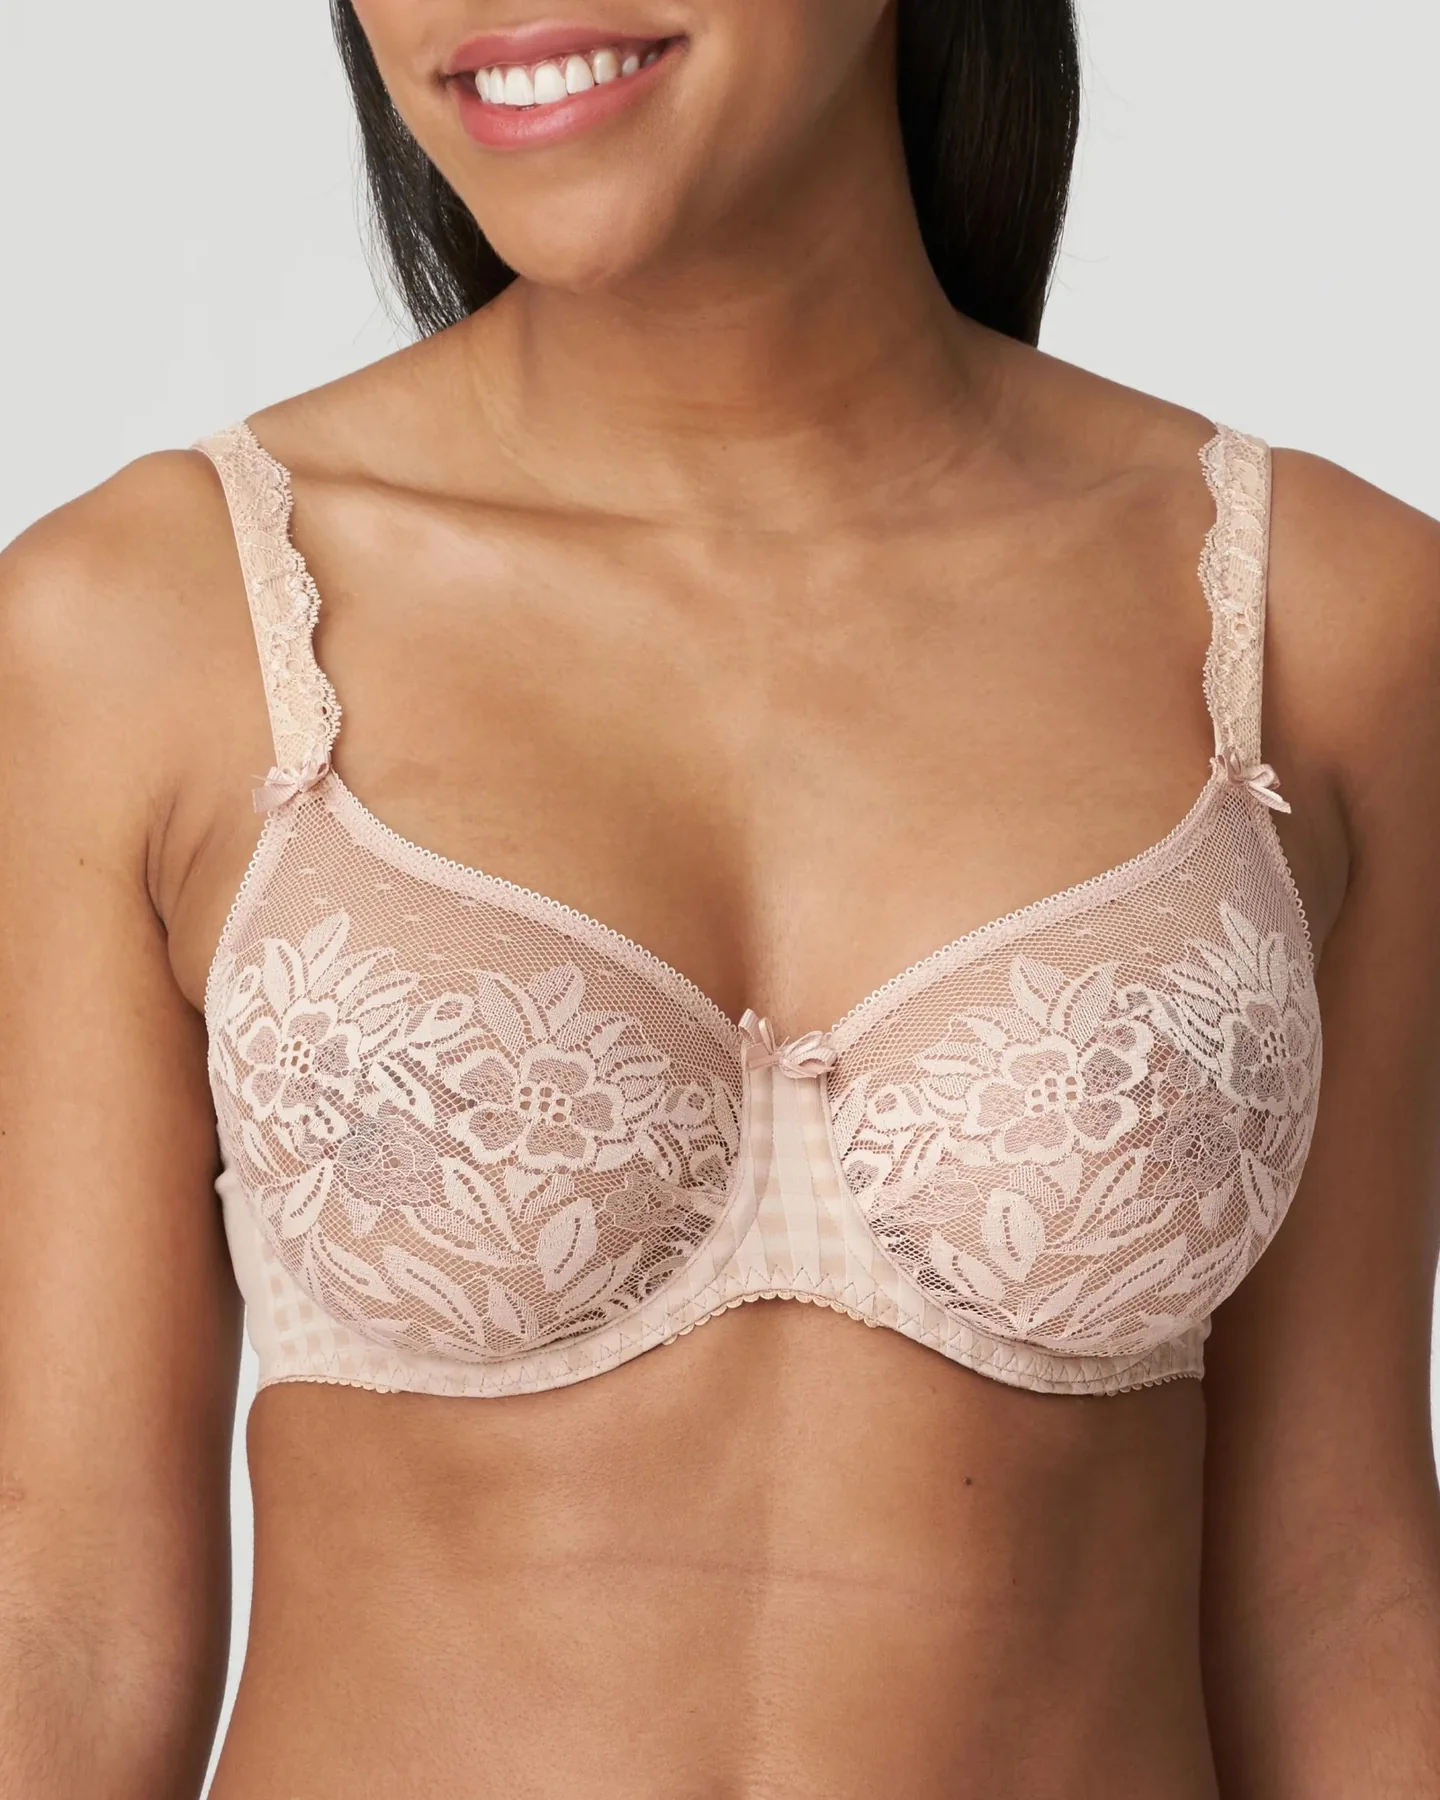 Bra Review - Prima Donna Madison Non Padded Full Cup Seamless Bra Caff